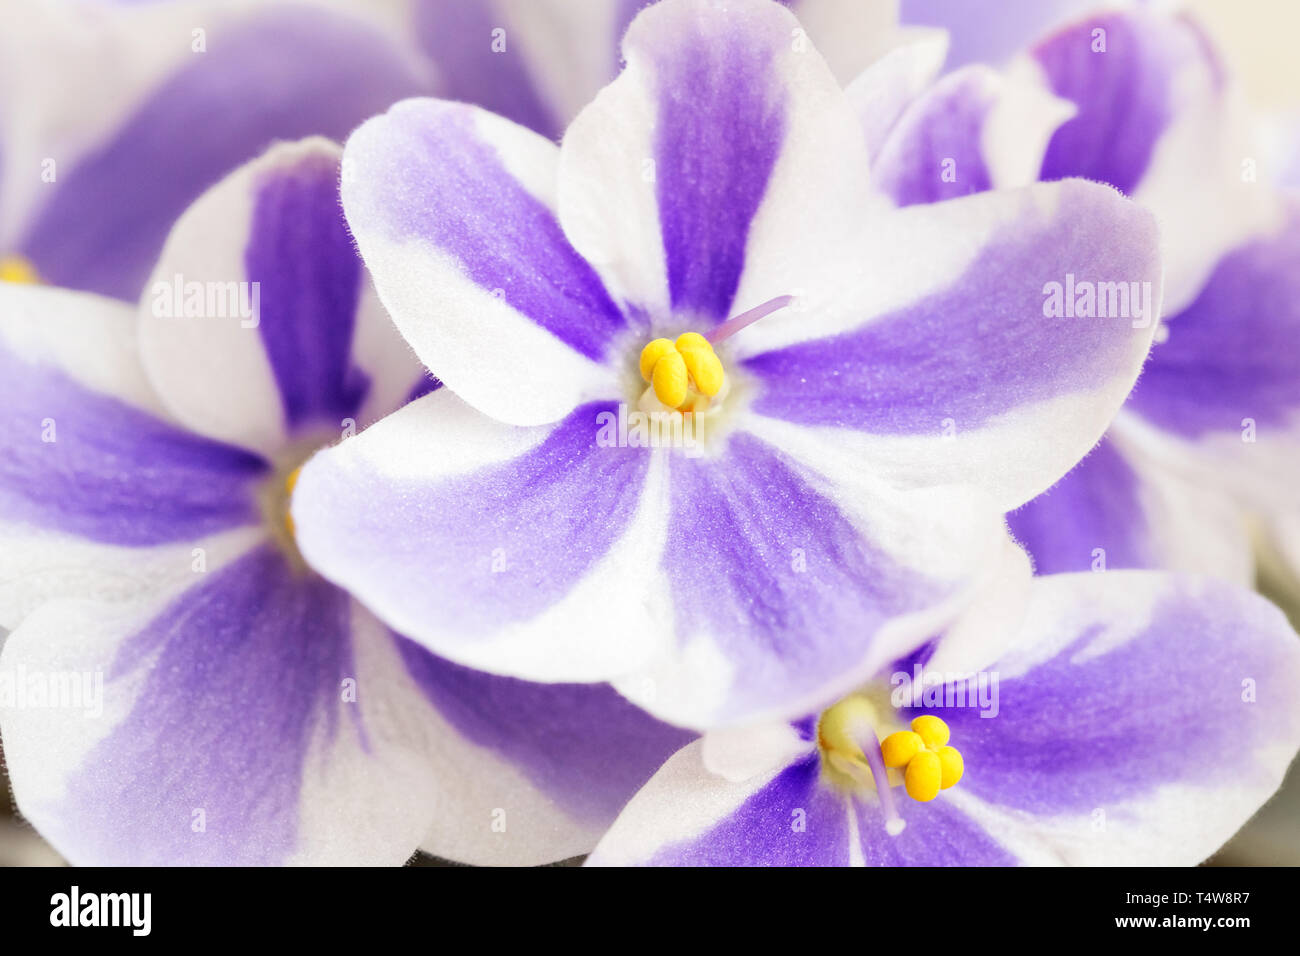 Violet flower with striped petals on white background. Selective focus. Macro. Stock Photo